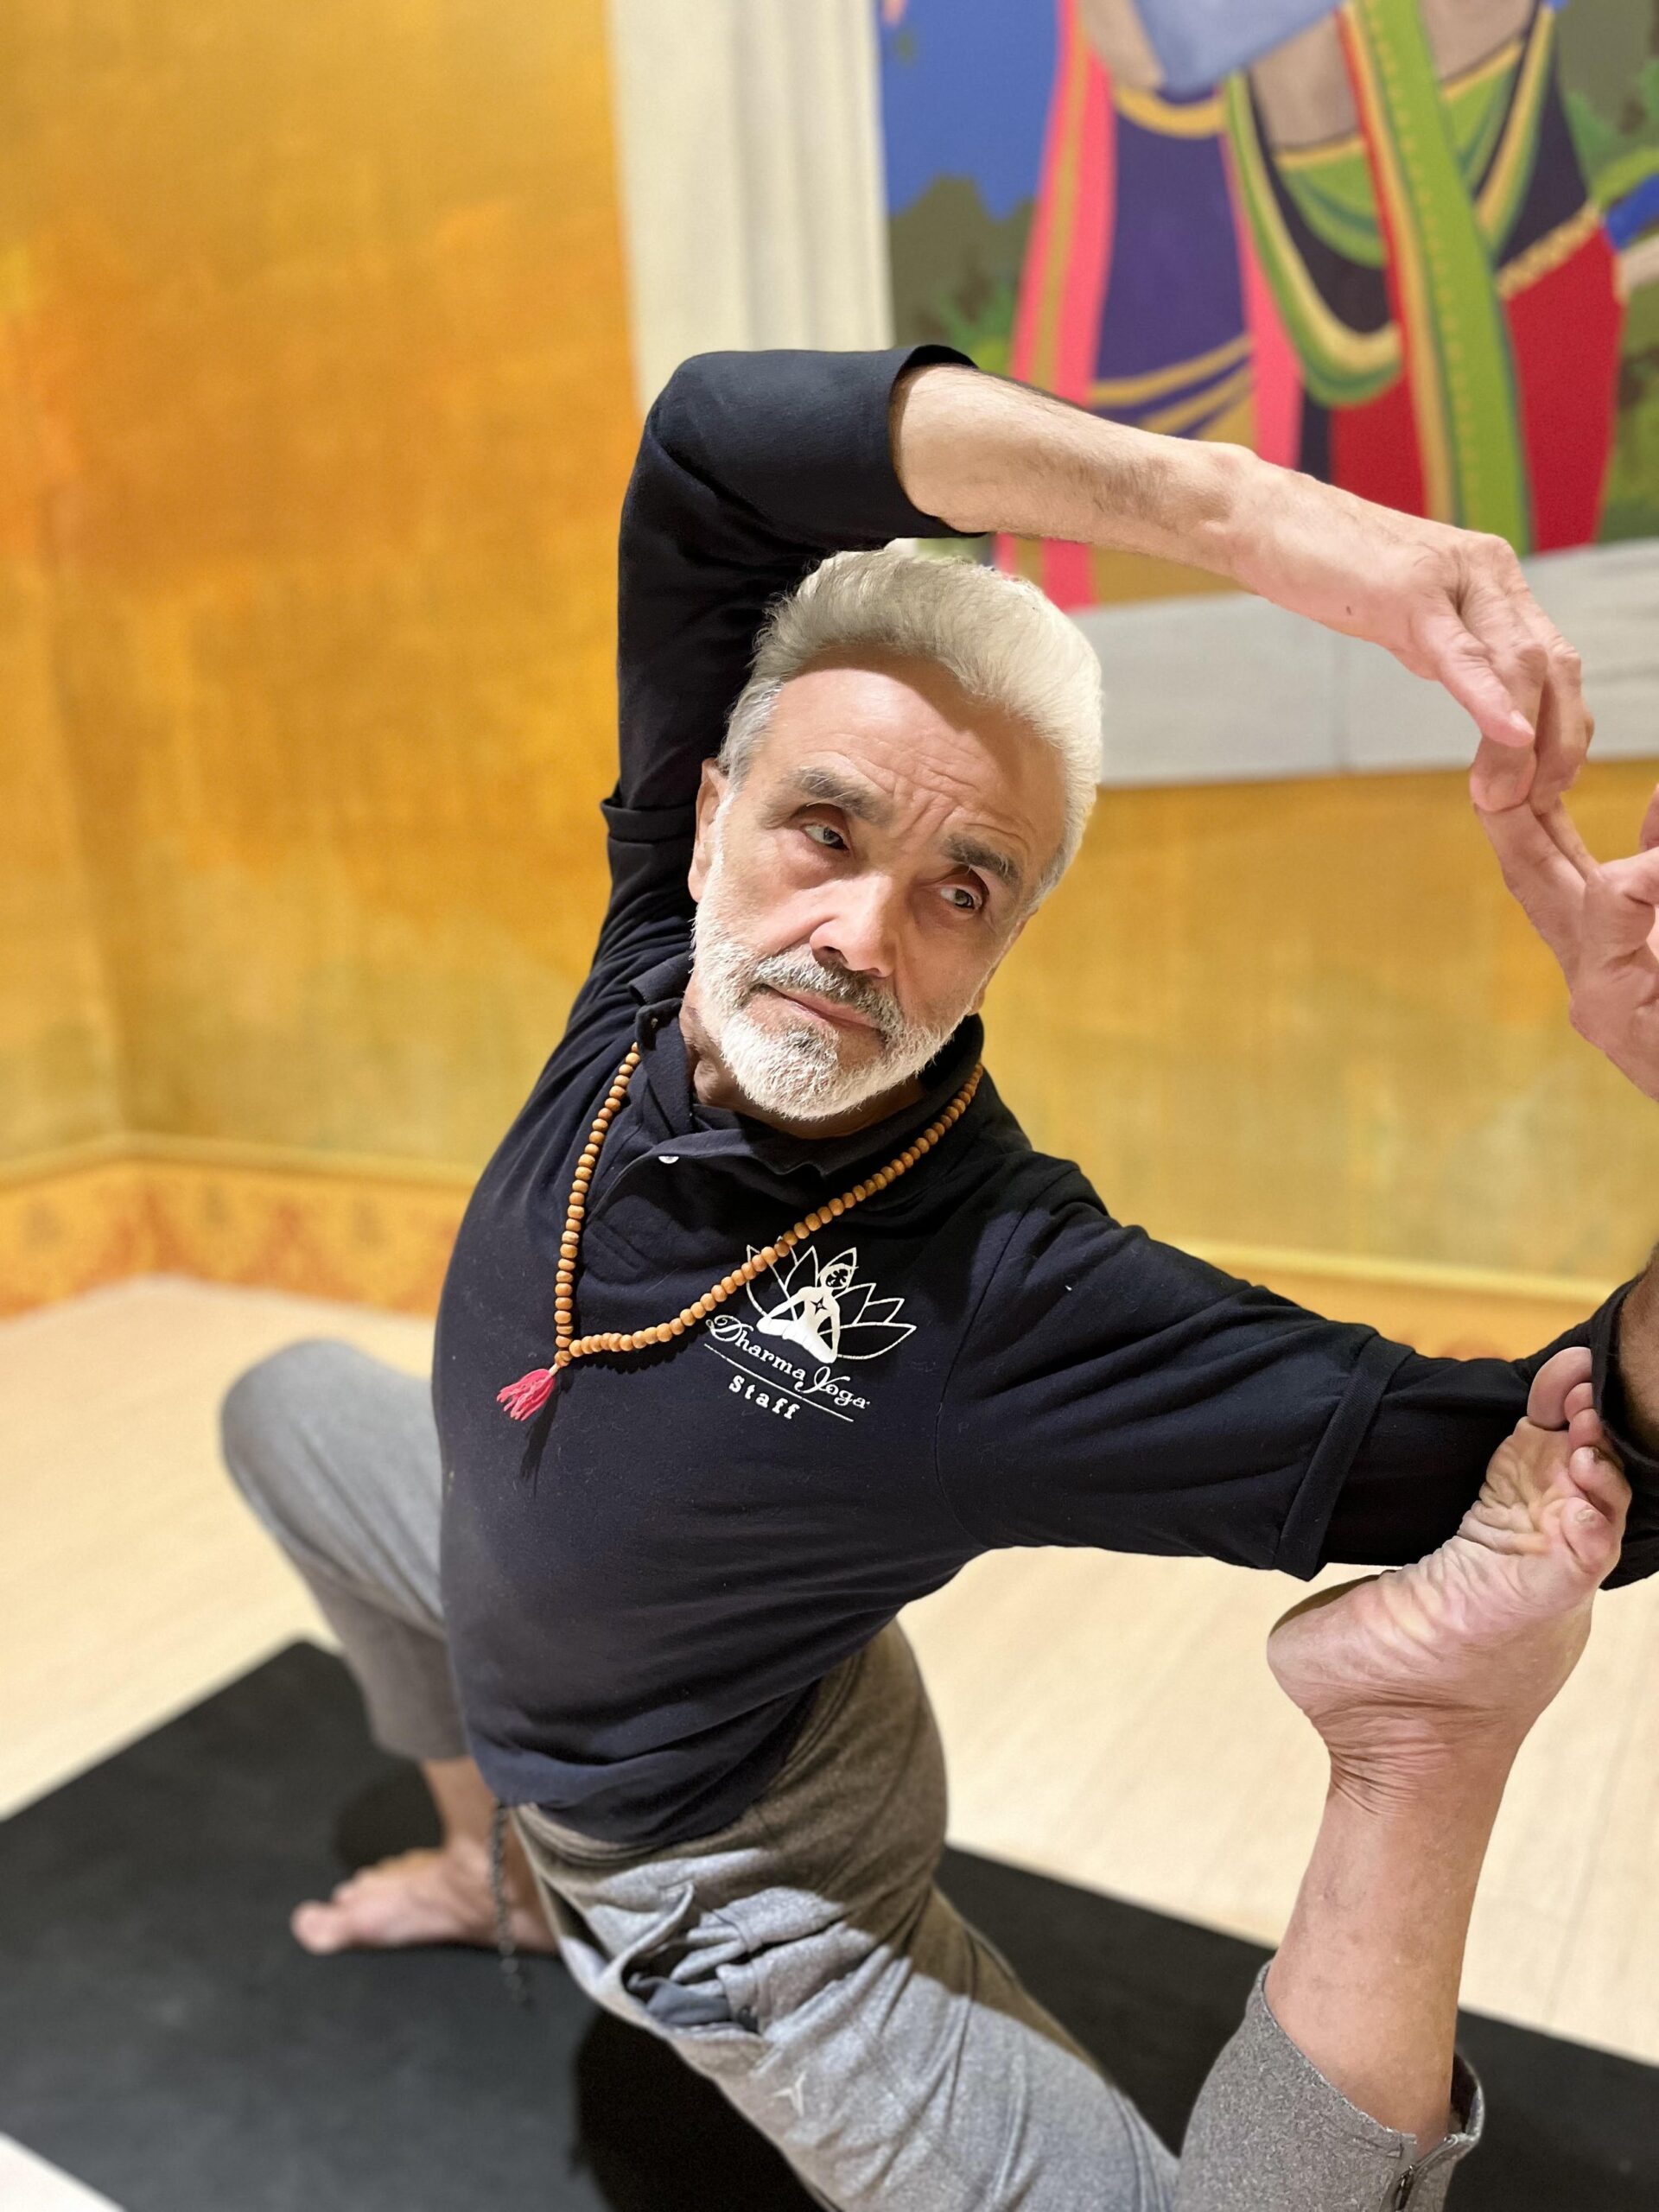 Sri Dharma Mittra in mermaid pose at the Dharma Yoga Center in front of Hanuman and the golden walls